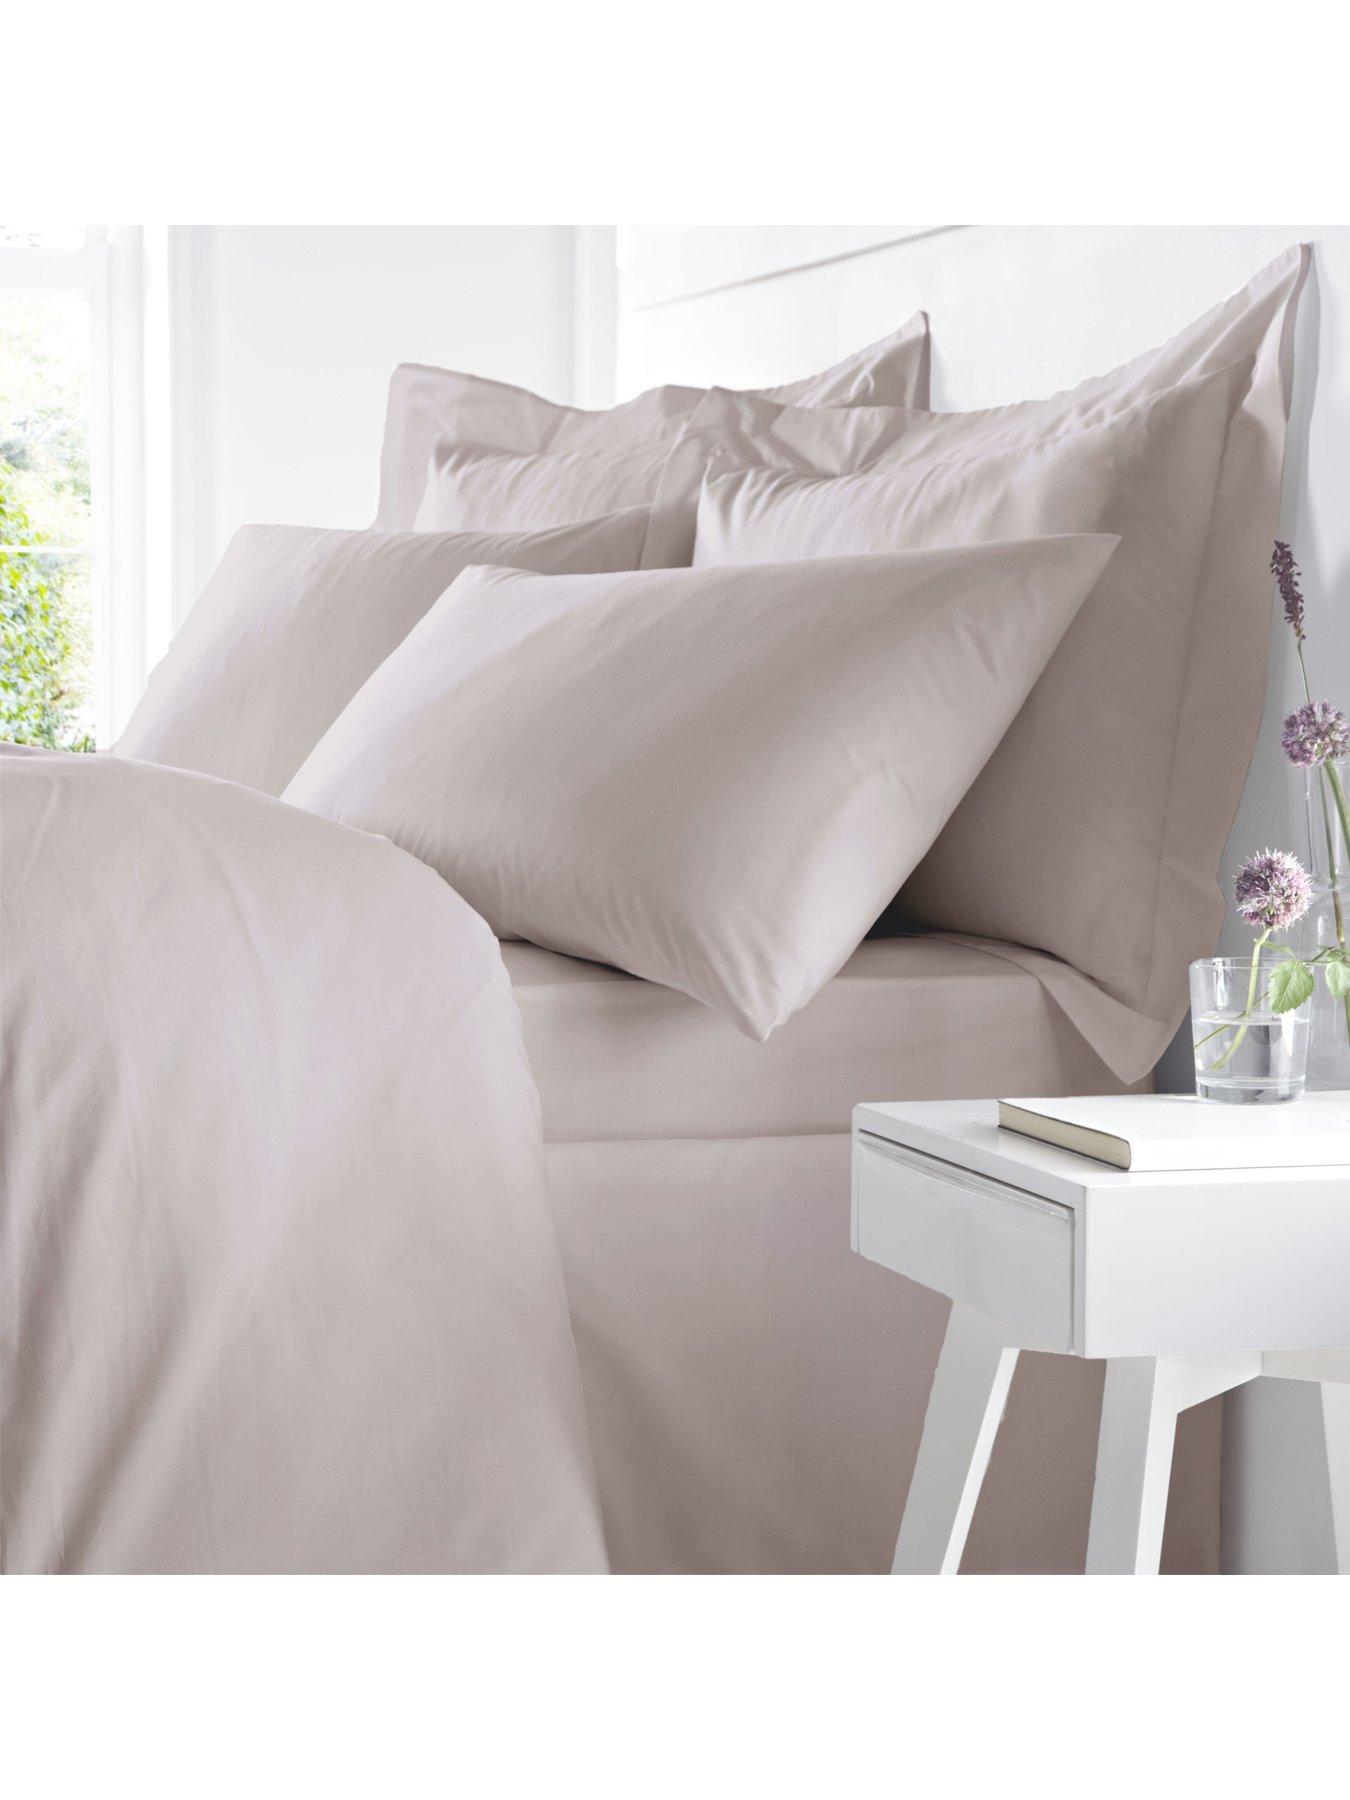 Details about   100% Cotton Sheet Set Flat & Fitted Sheets Pillowcases High Quality US Standards